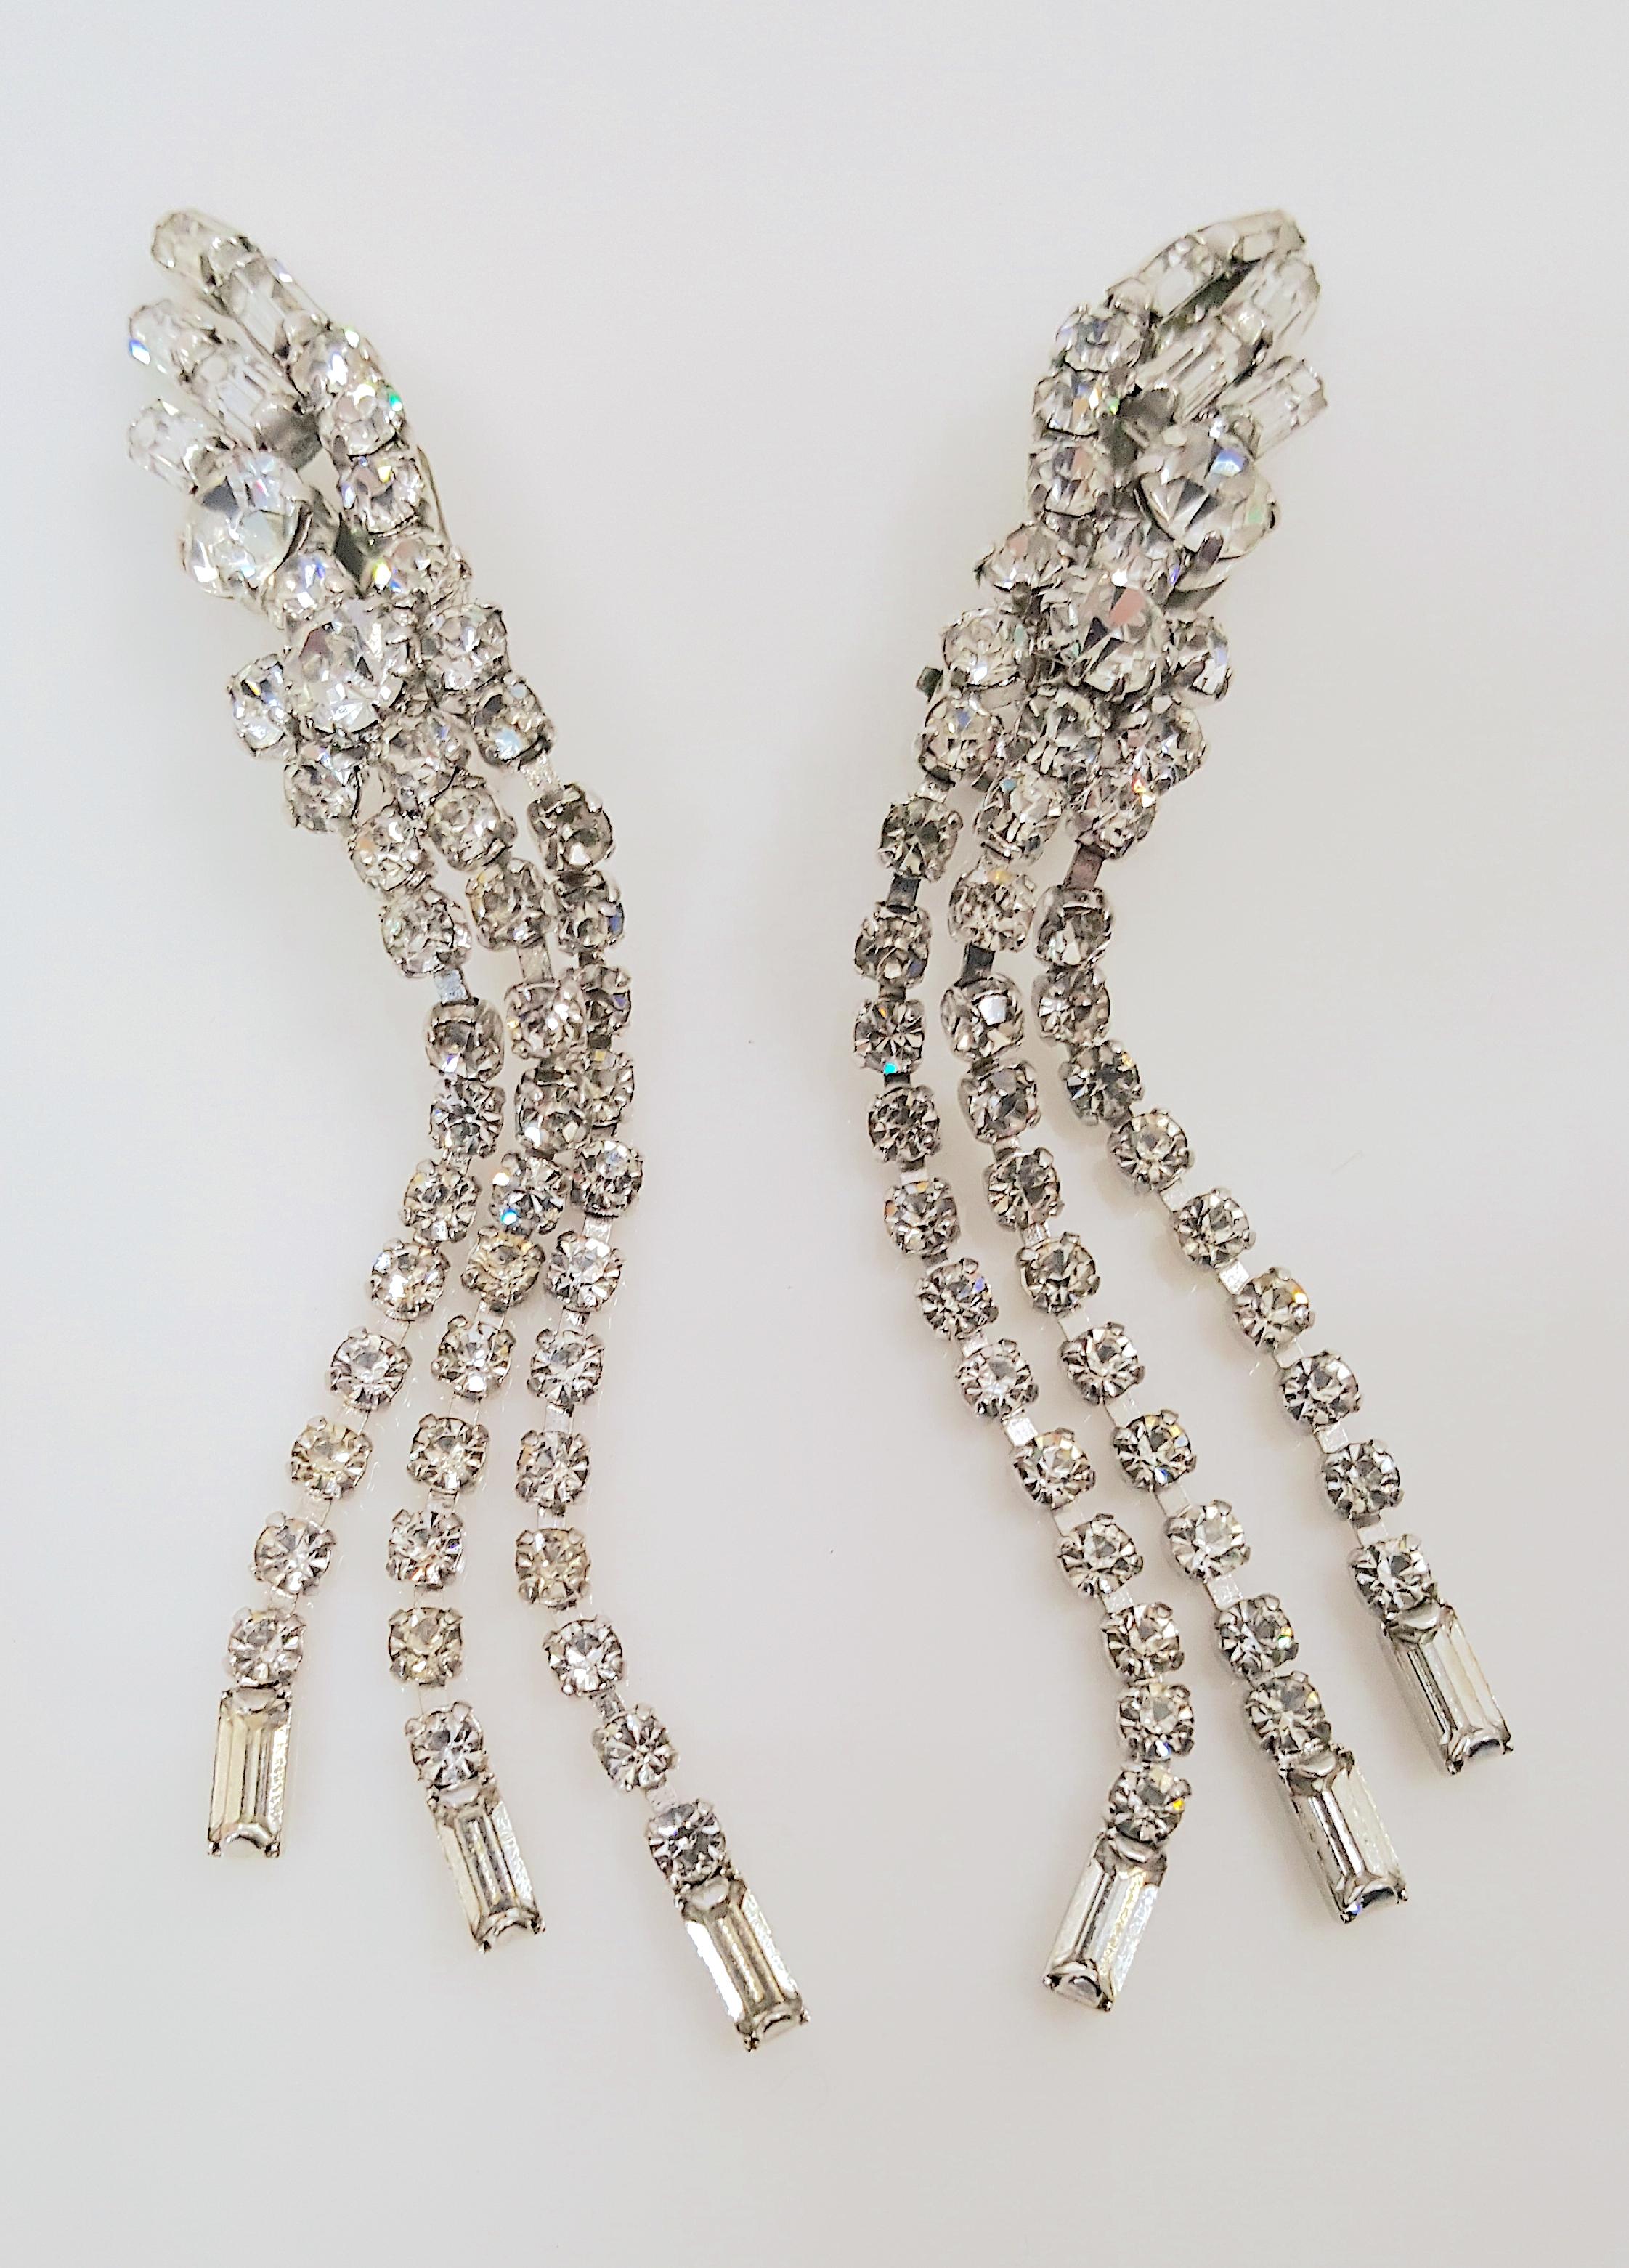 HautCoutureDiorDesignerWesternGermanyMaxMuller Crystal SinuousDangleClipEarrings For Sale 3